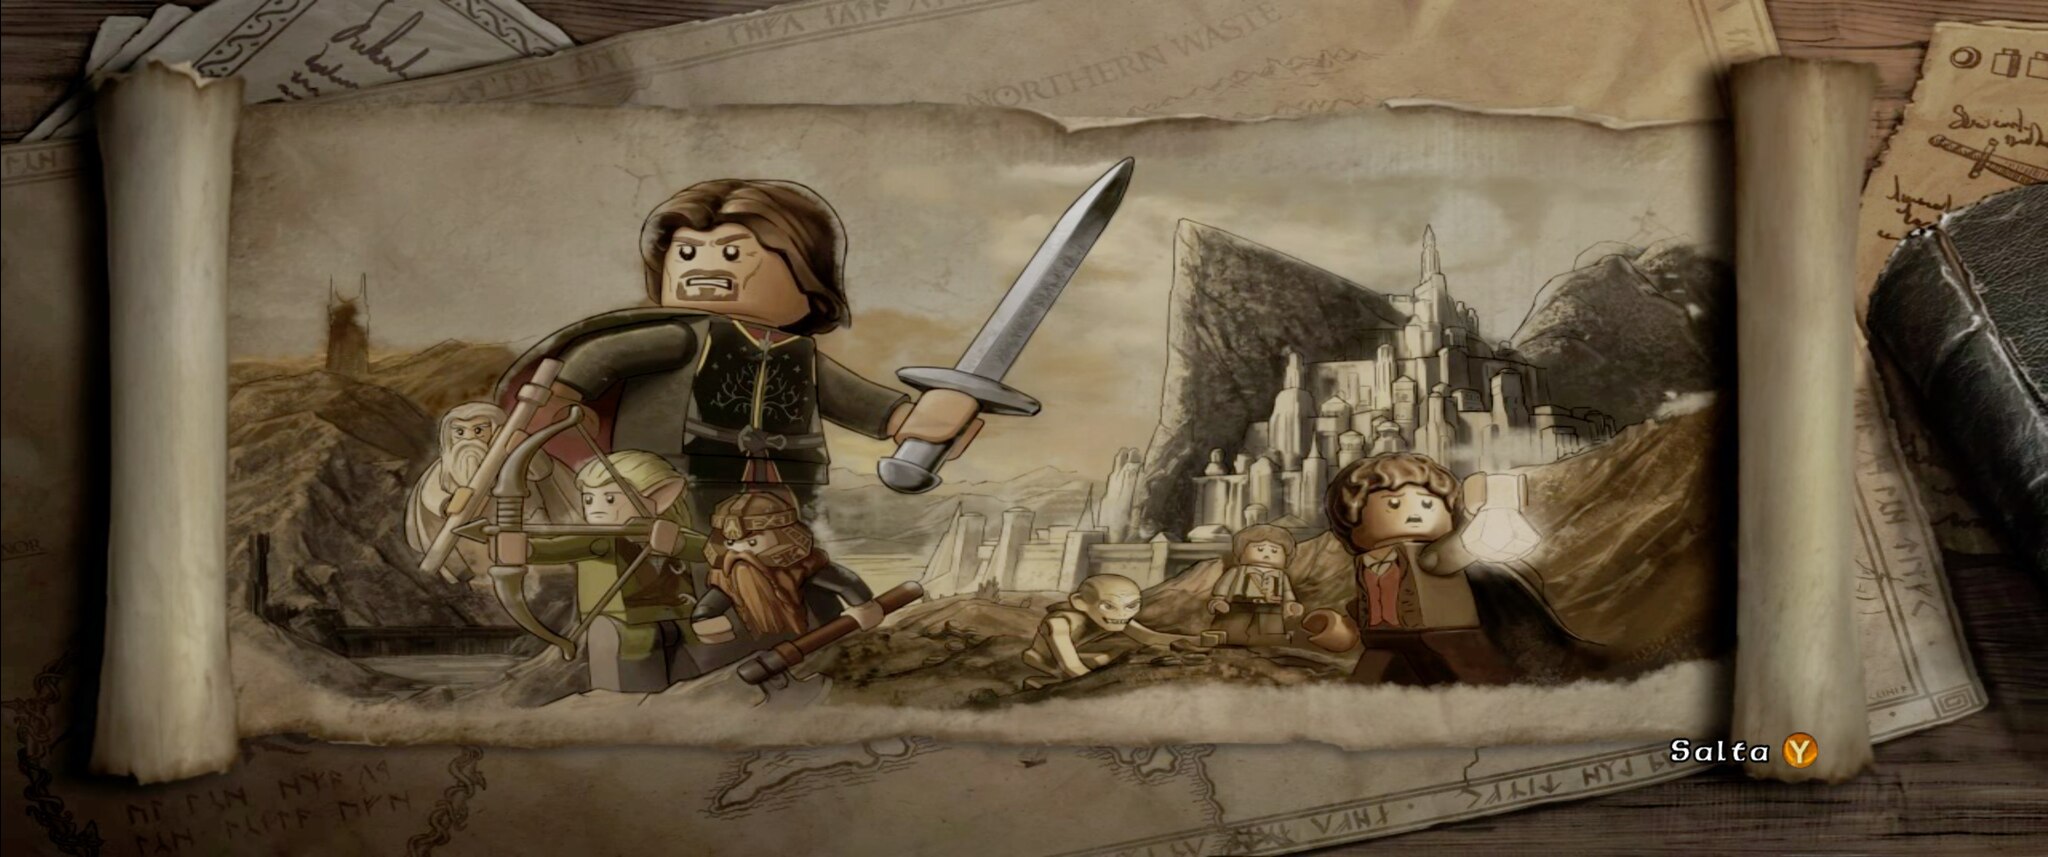 lego lord of the rings codes wii